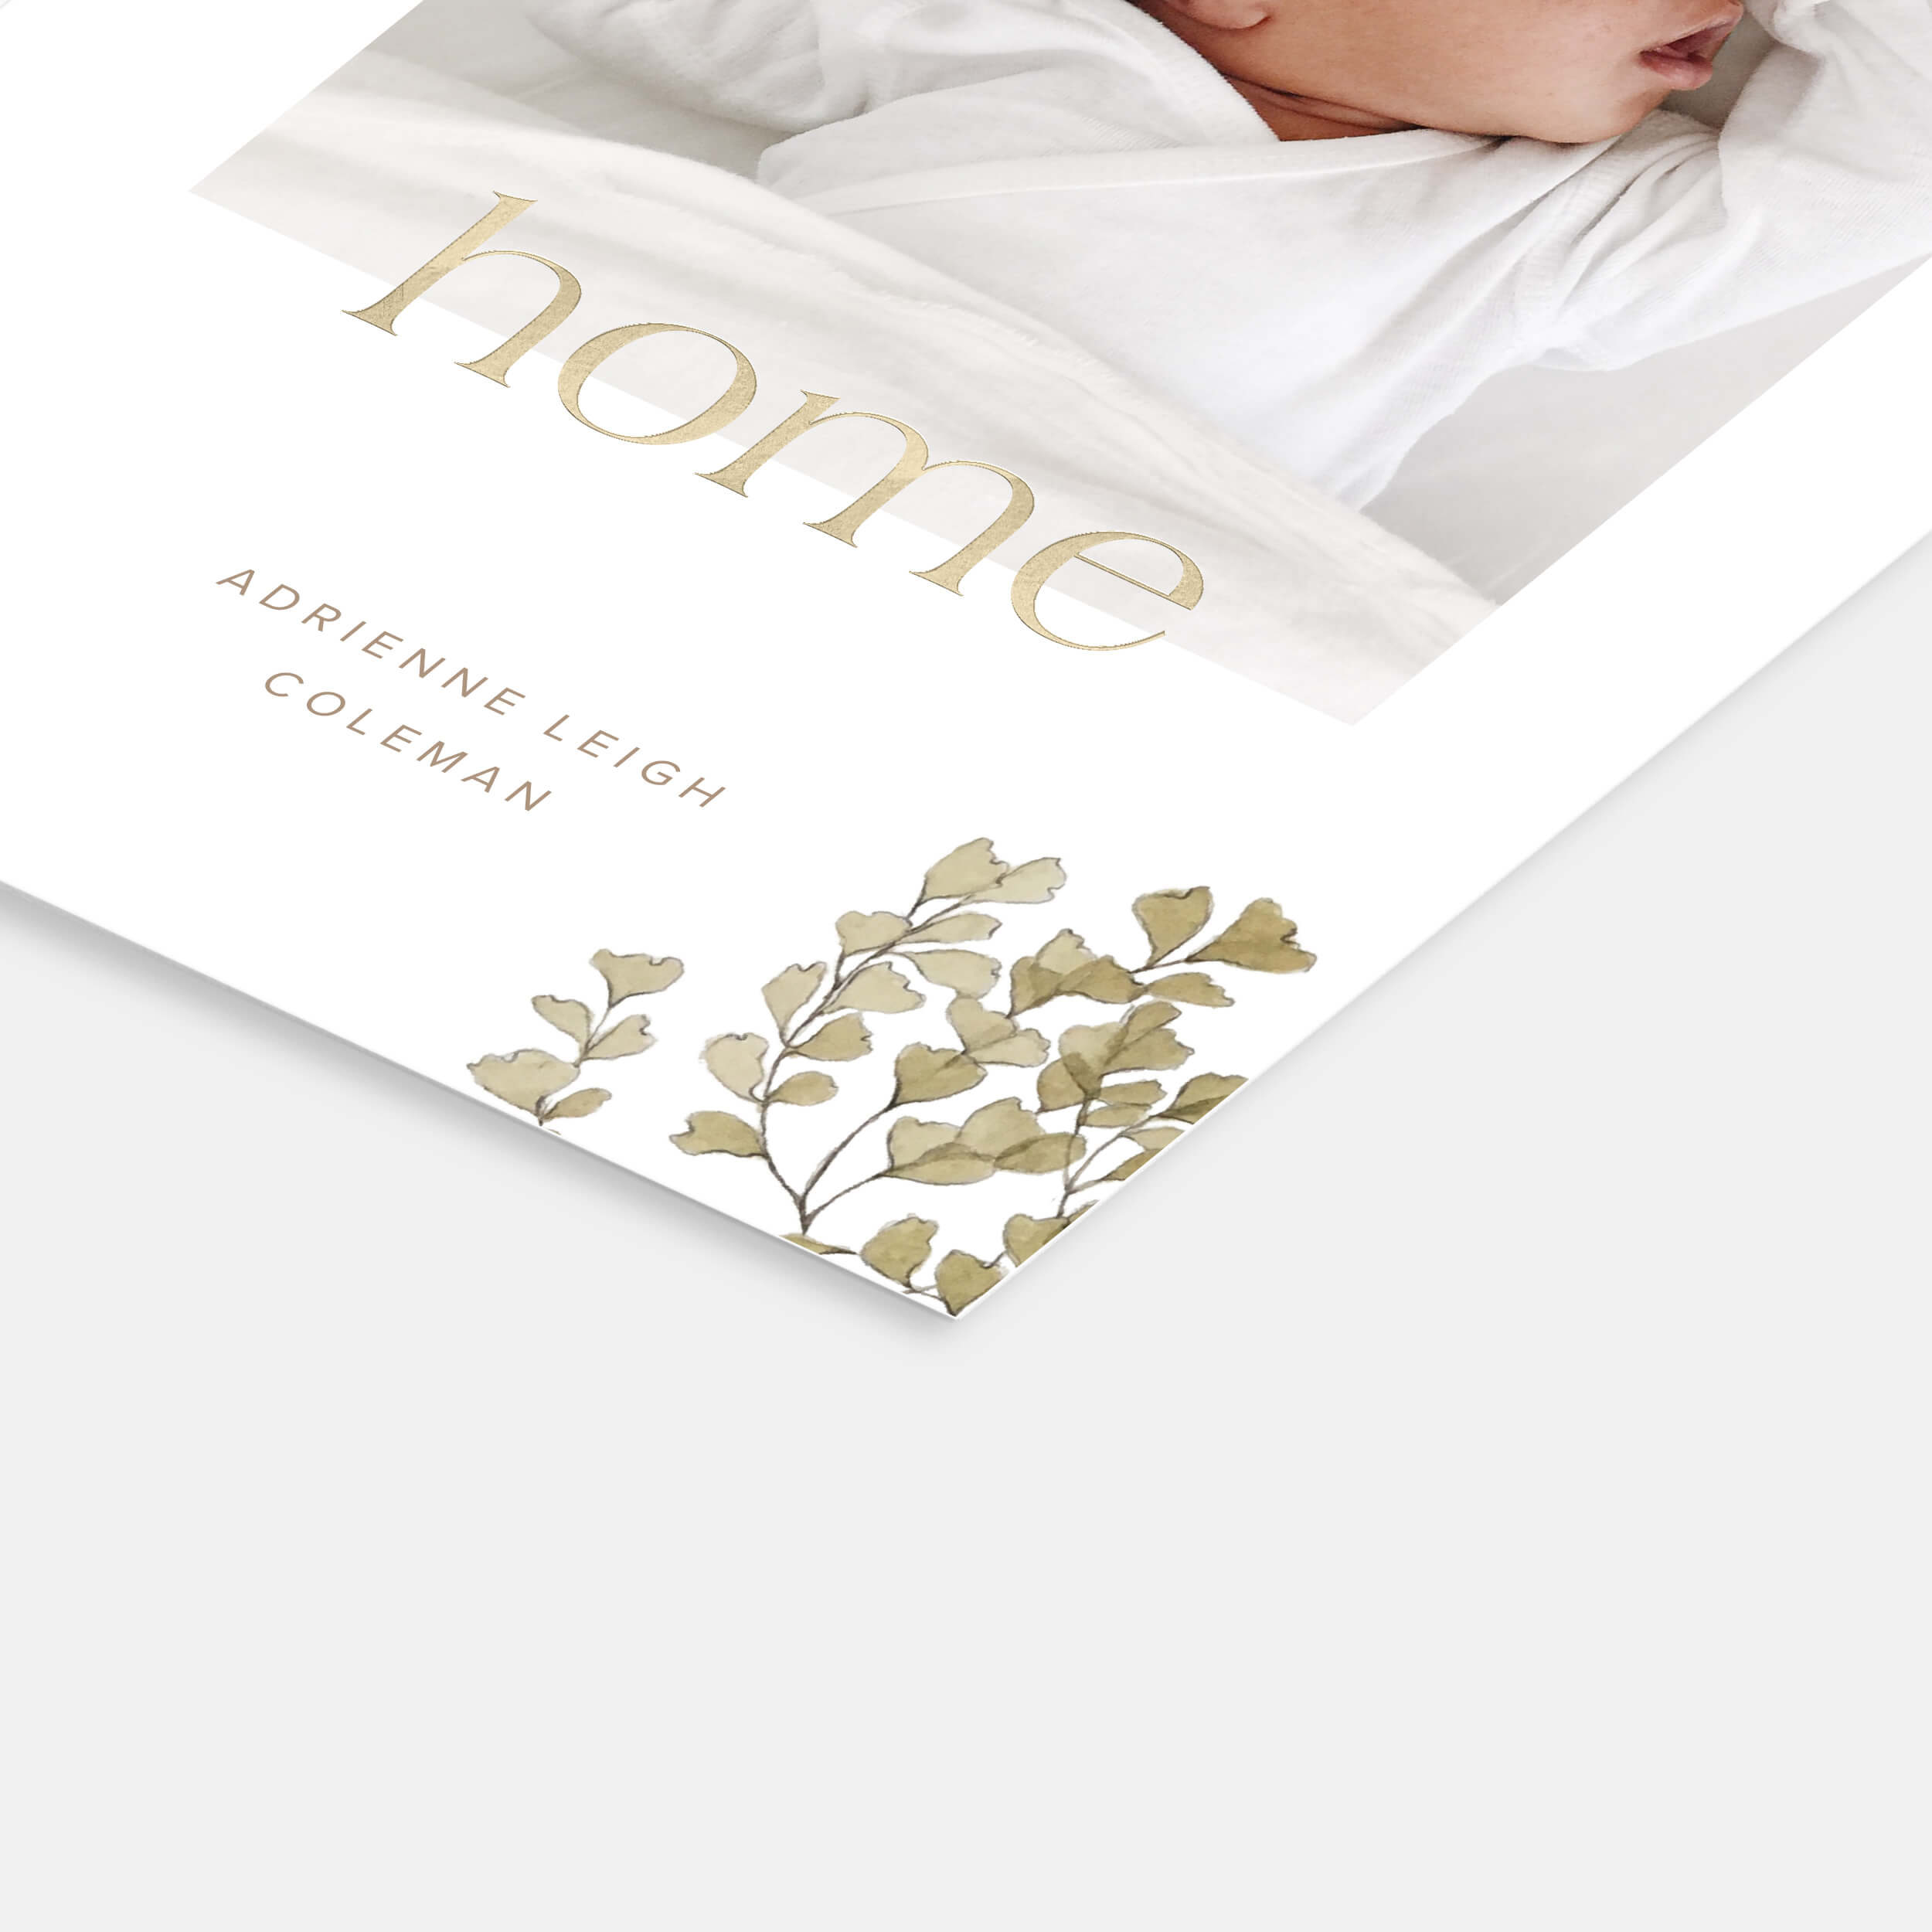 Welcome Home Botanical Birth Announcement